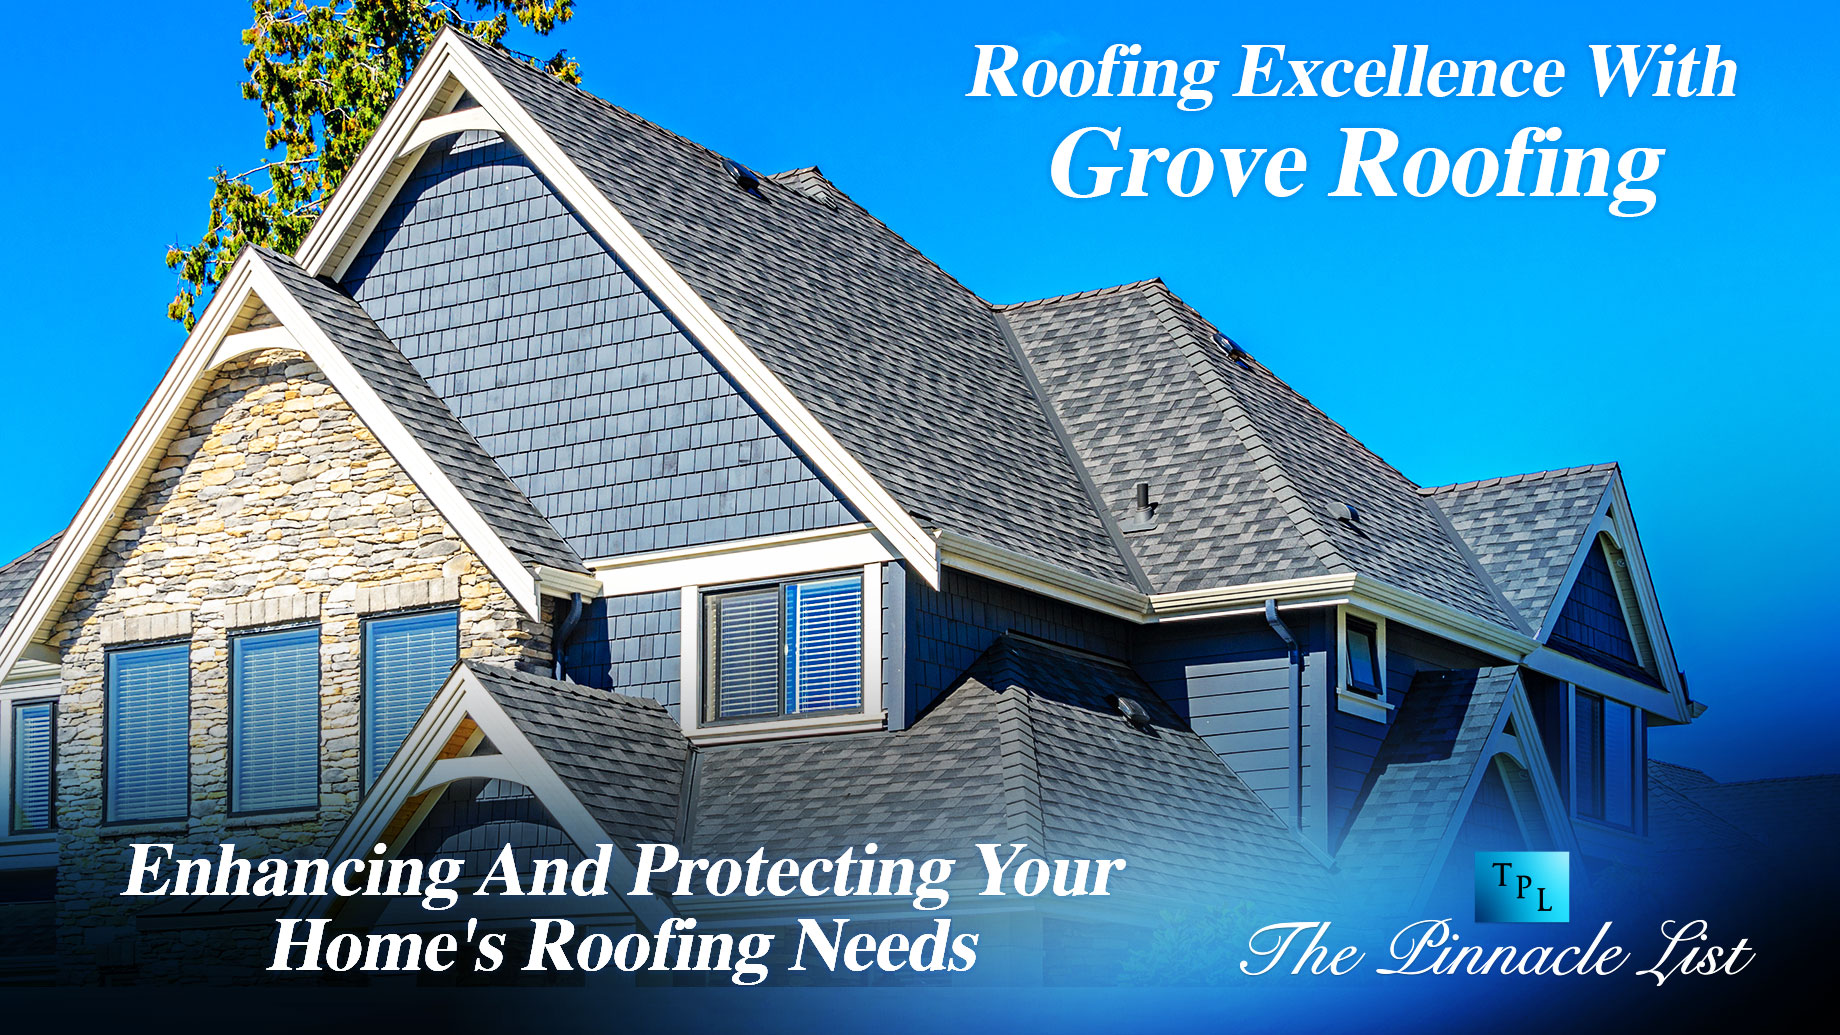 Roofing Excellence With Grove Roofing: Enhancing And Protecting Your Home's Roofing Needs